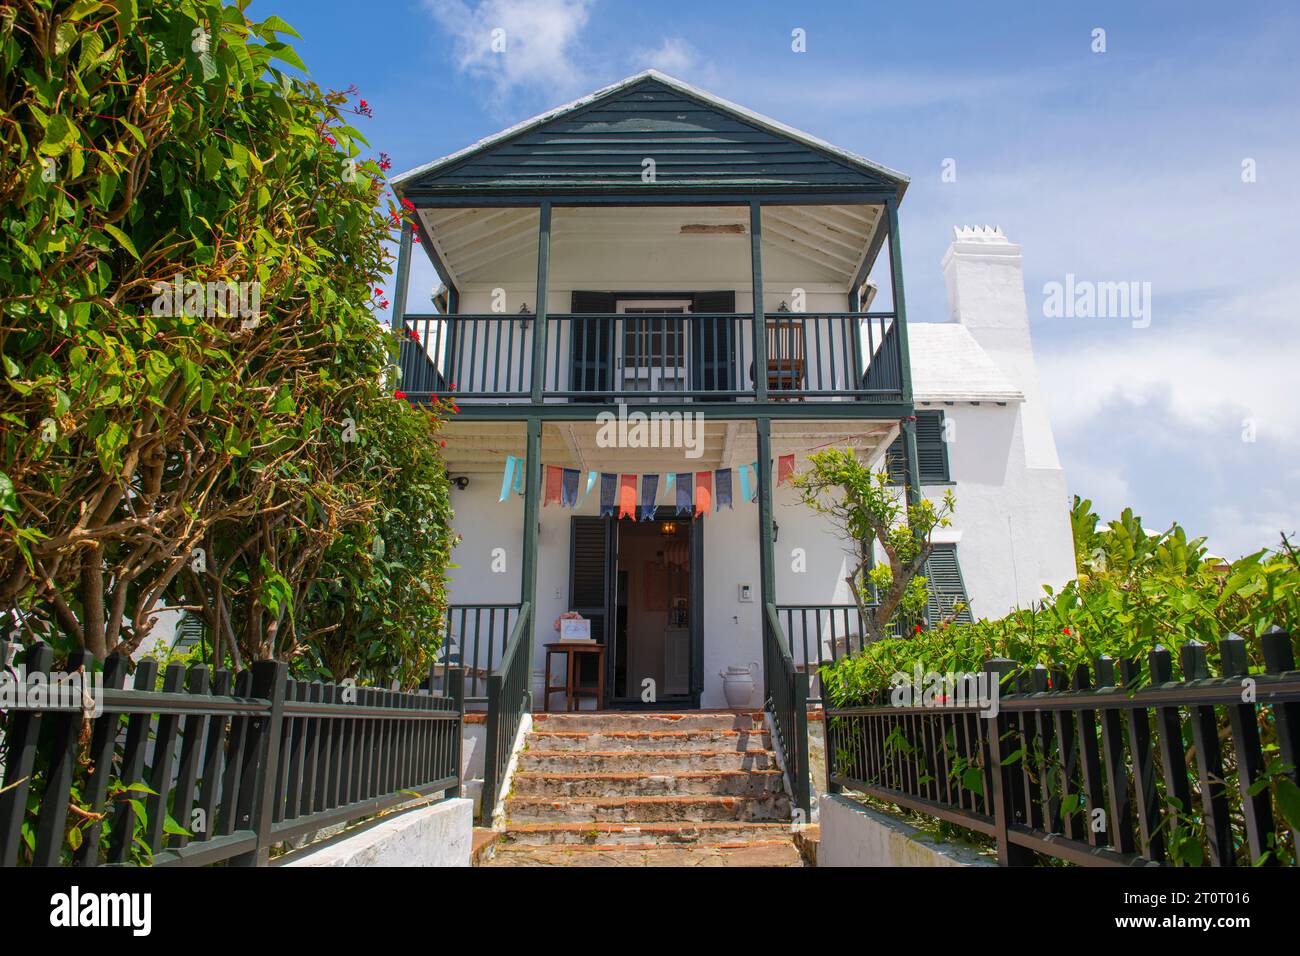 Bermuda style Bridge House at Kings Square in town center of St. George's in Bermuda. Historic Town of St. George is a World Heritage Site since 2000. Stock Photo